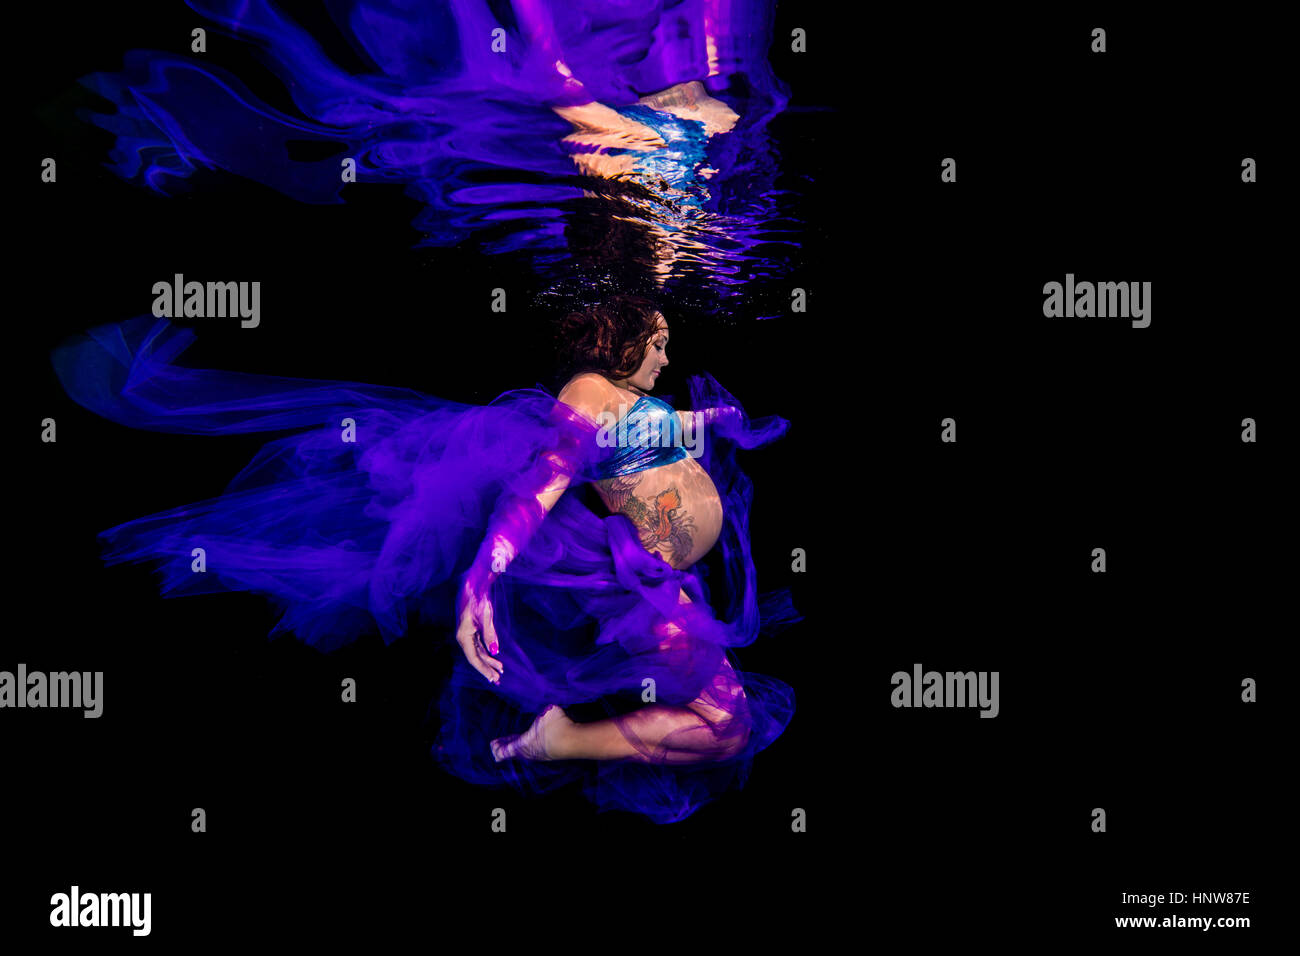 Pregnant woman draped in sheer fabric, underwater view Stock Photo